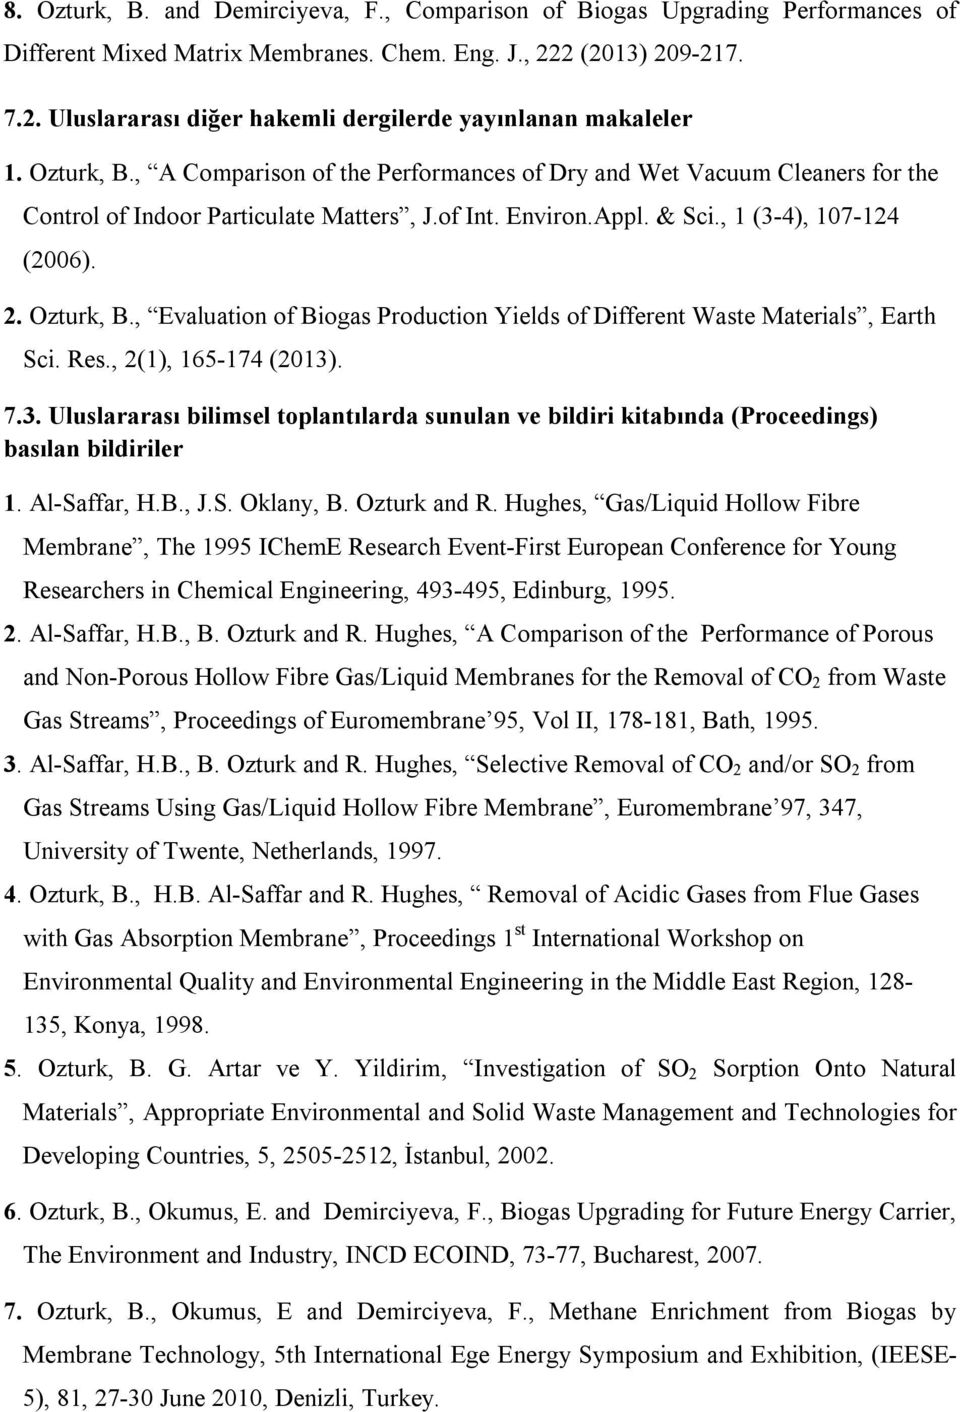 , Evaluation of Biogas Production Yields of Different Waste Materials, Earth Sci. Res., 2(1), 165-174 (2013)